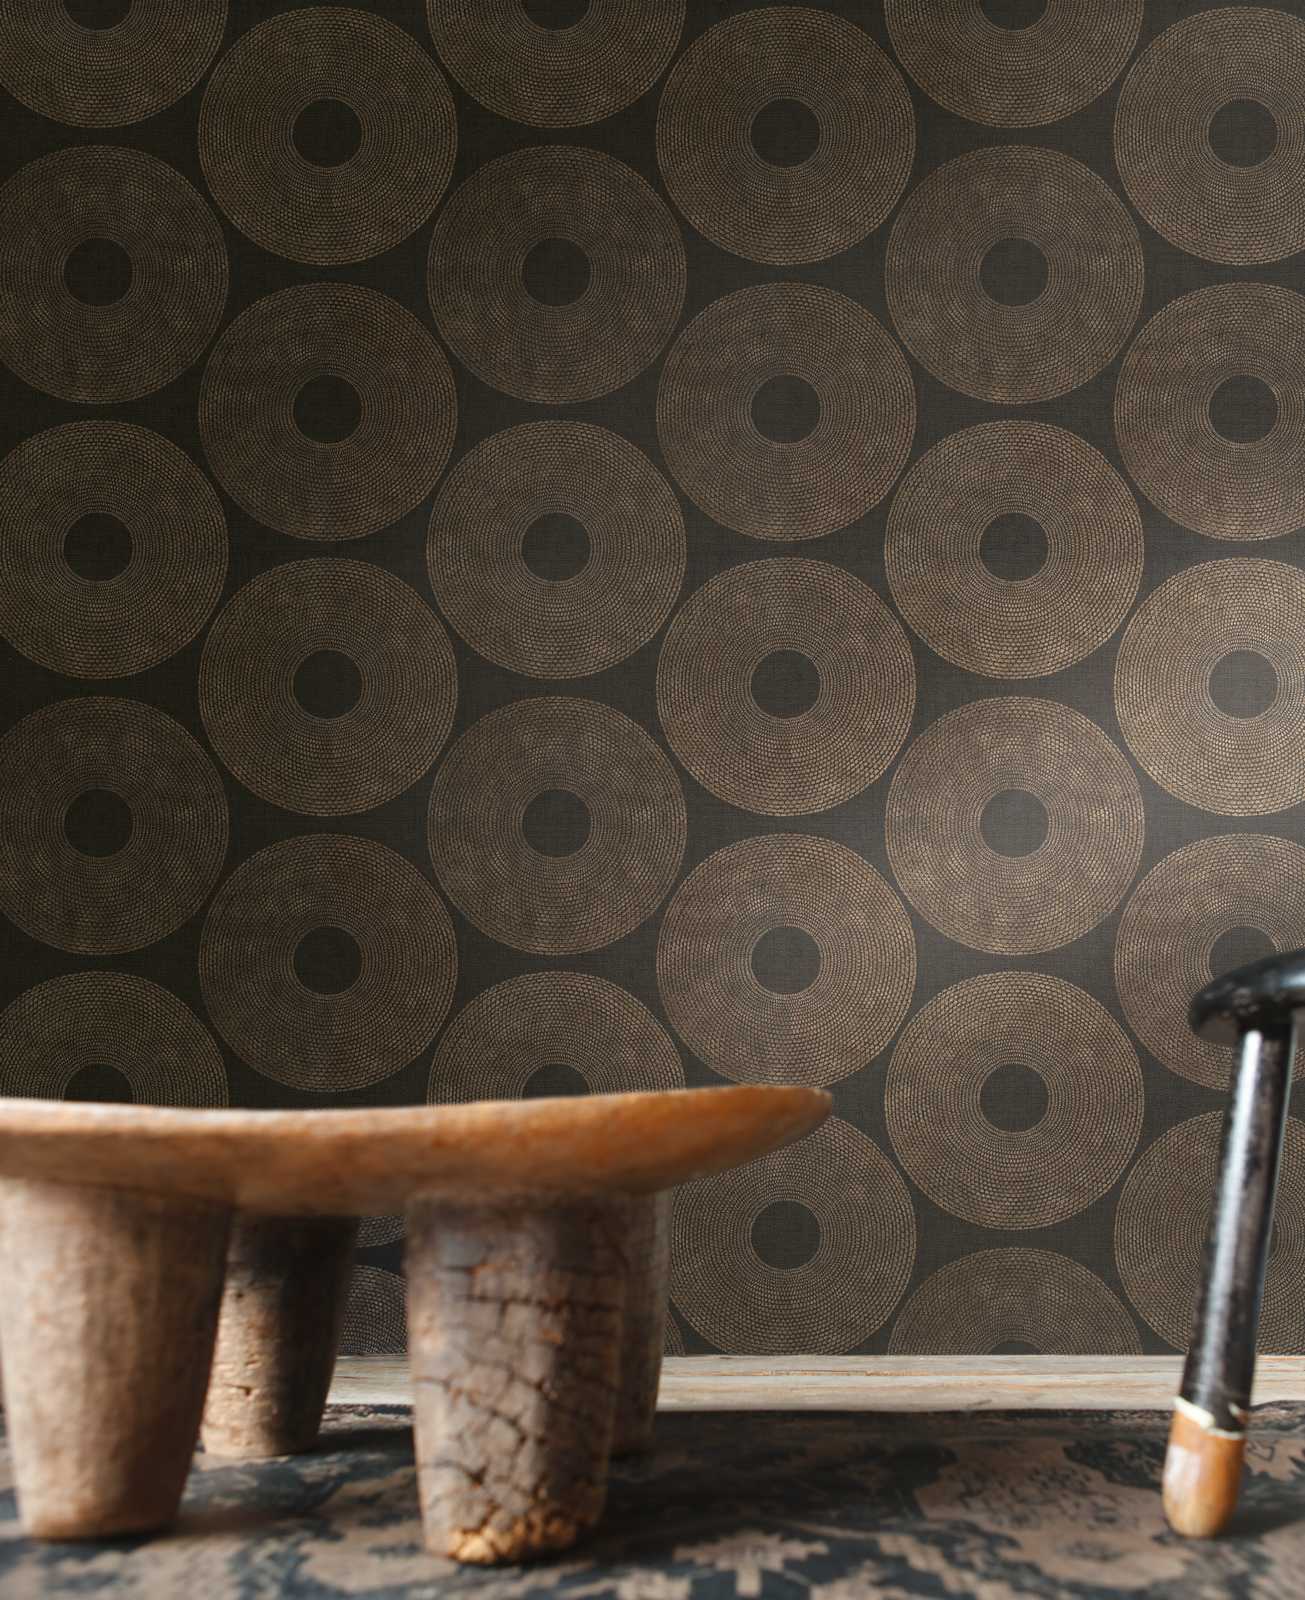             Ethno wallpaper circles with structure design - grey, brown
        